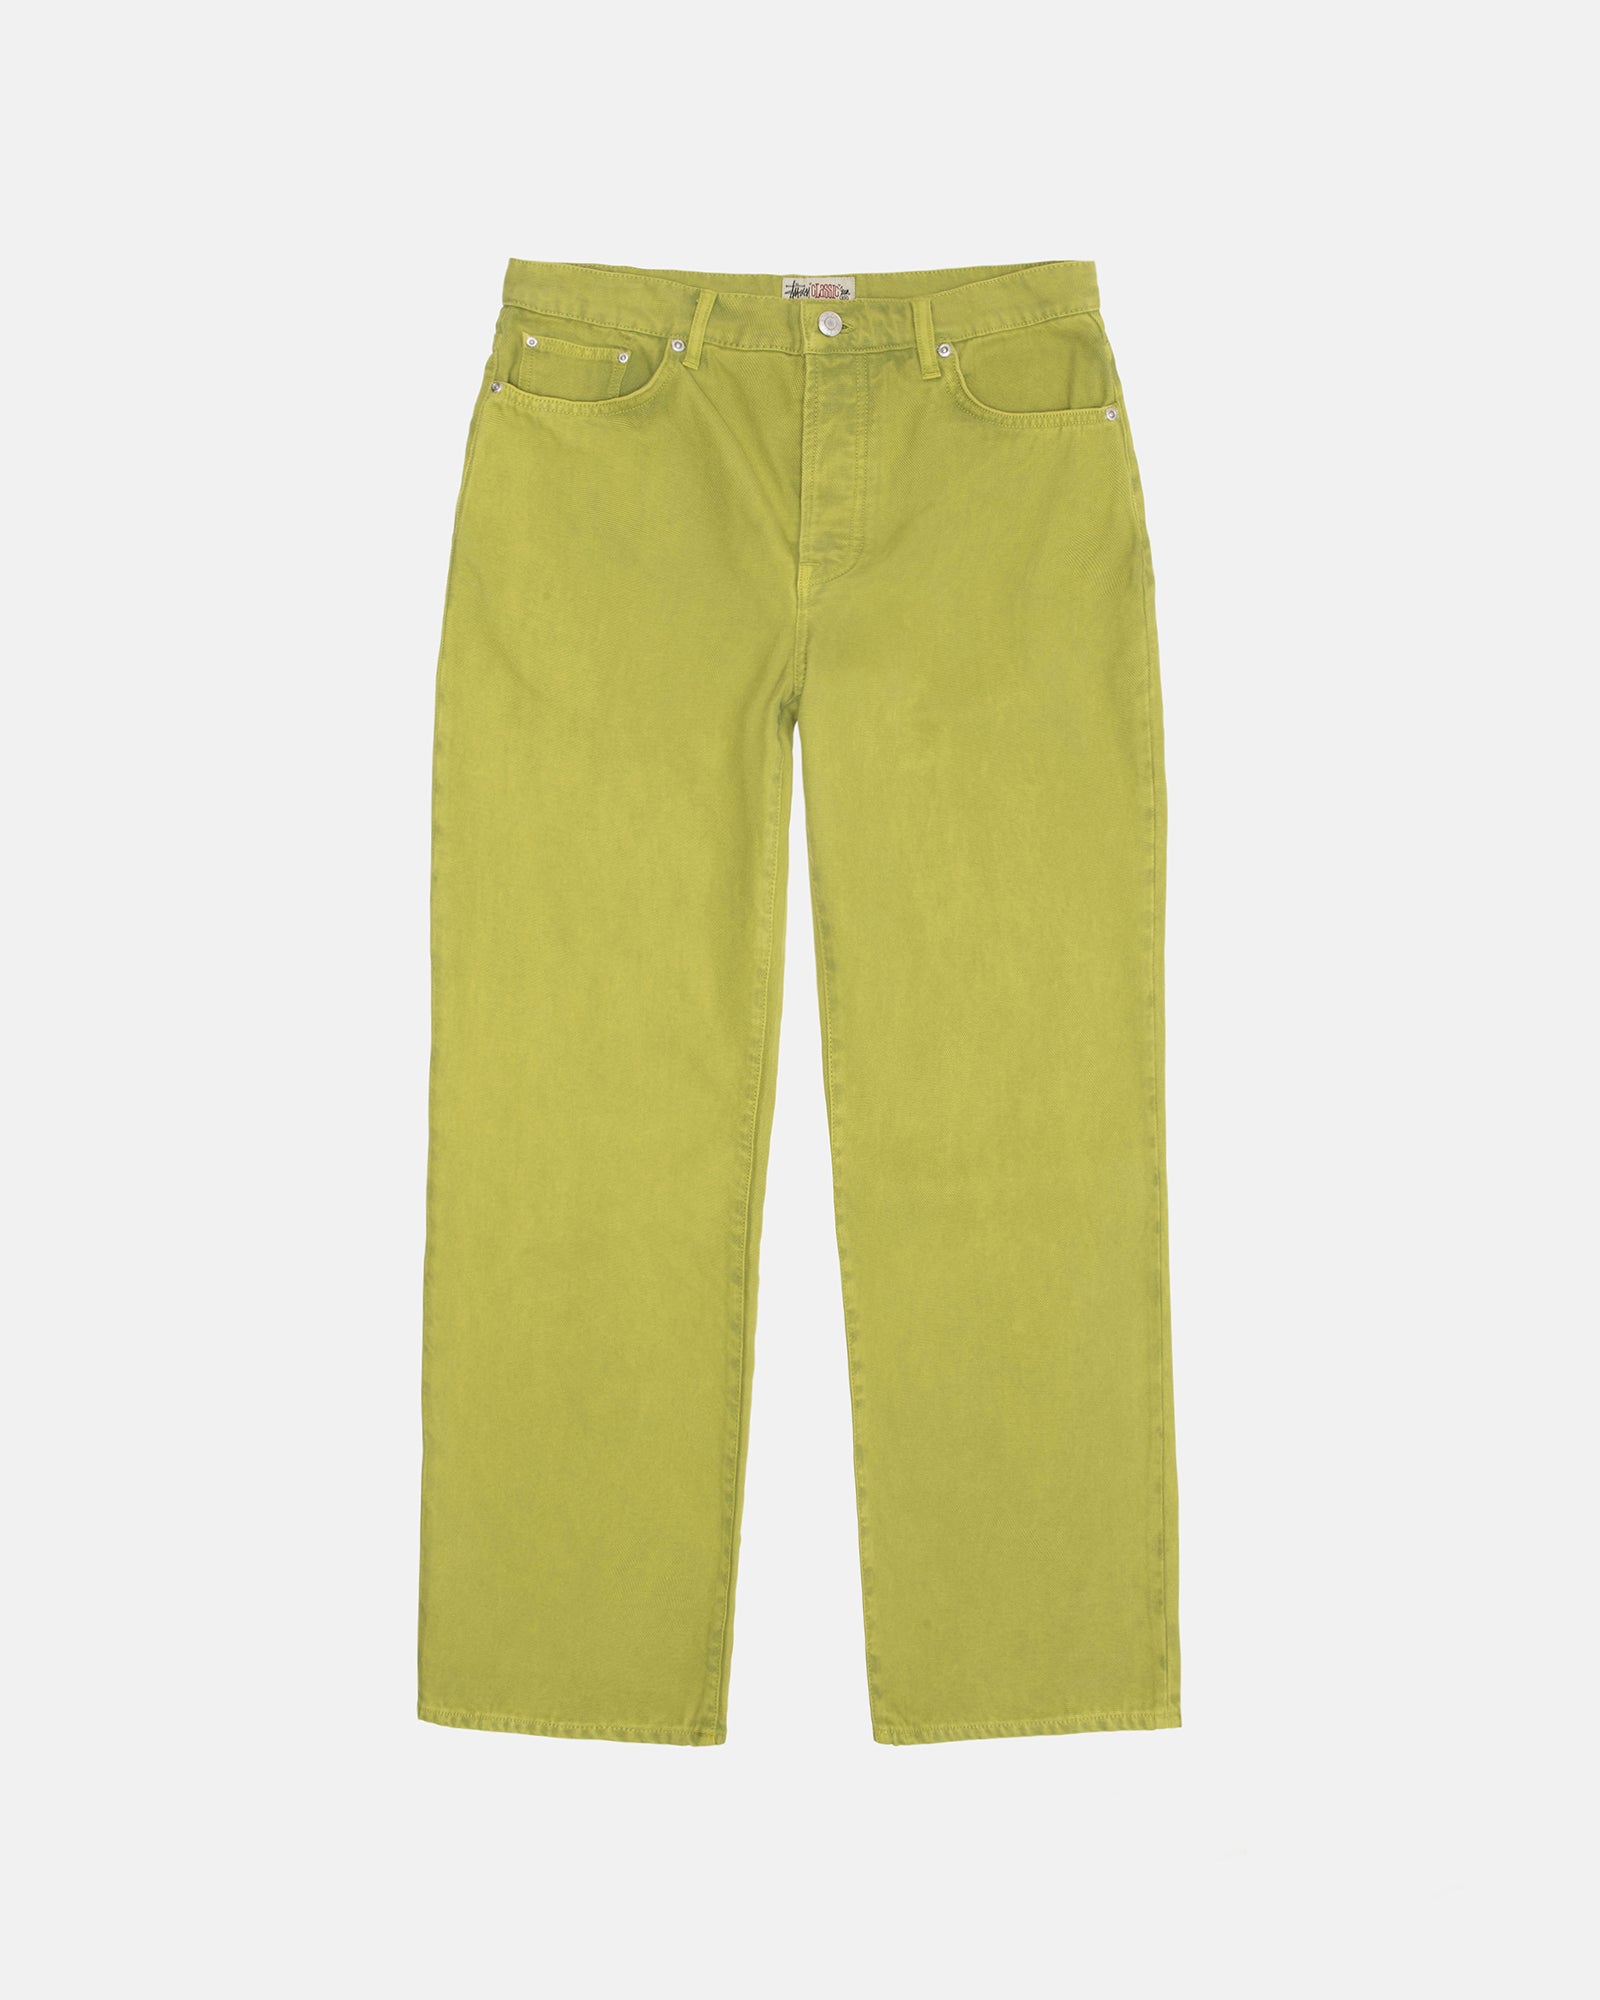 STÜSSY CLASSIC JEAN WASHED CANVAS CACTUS PANTS